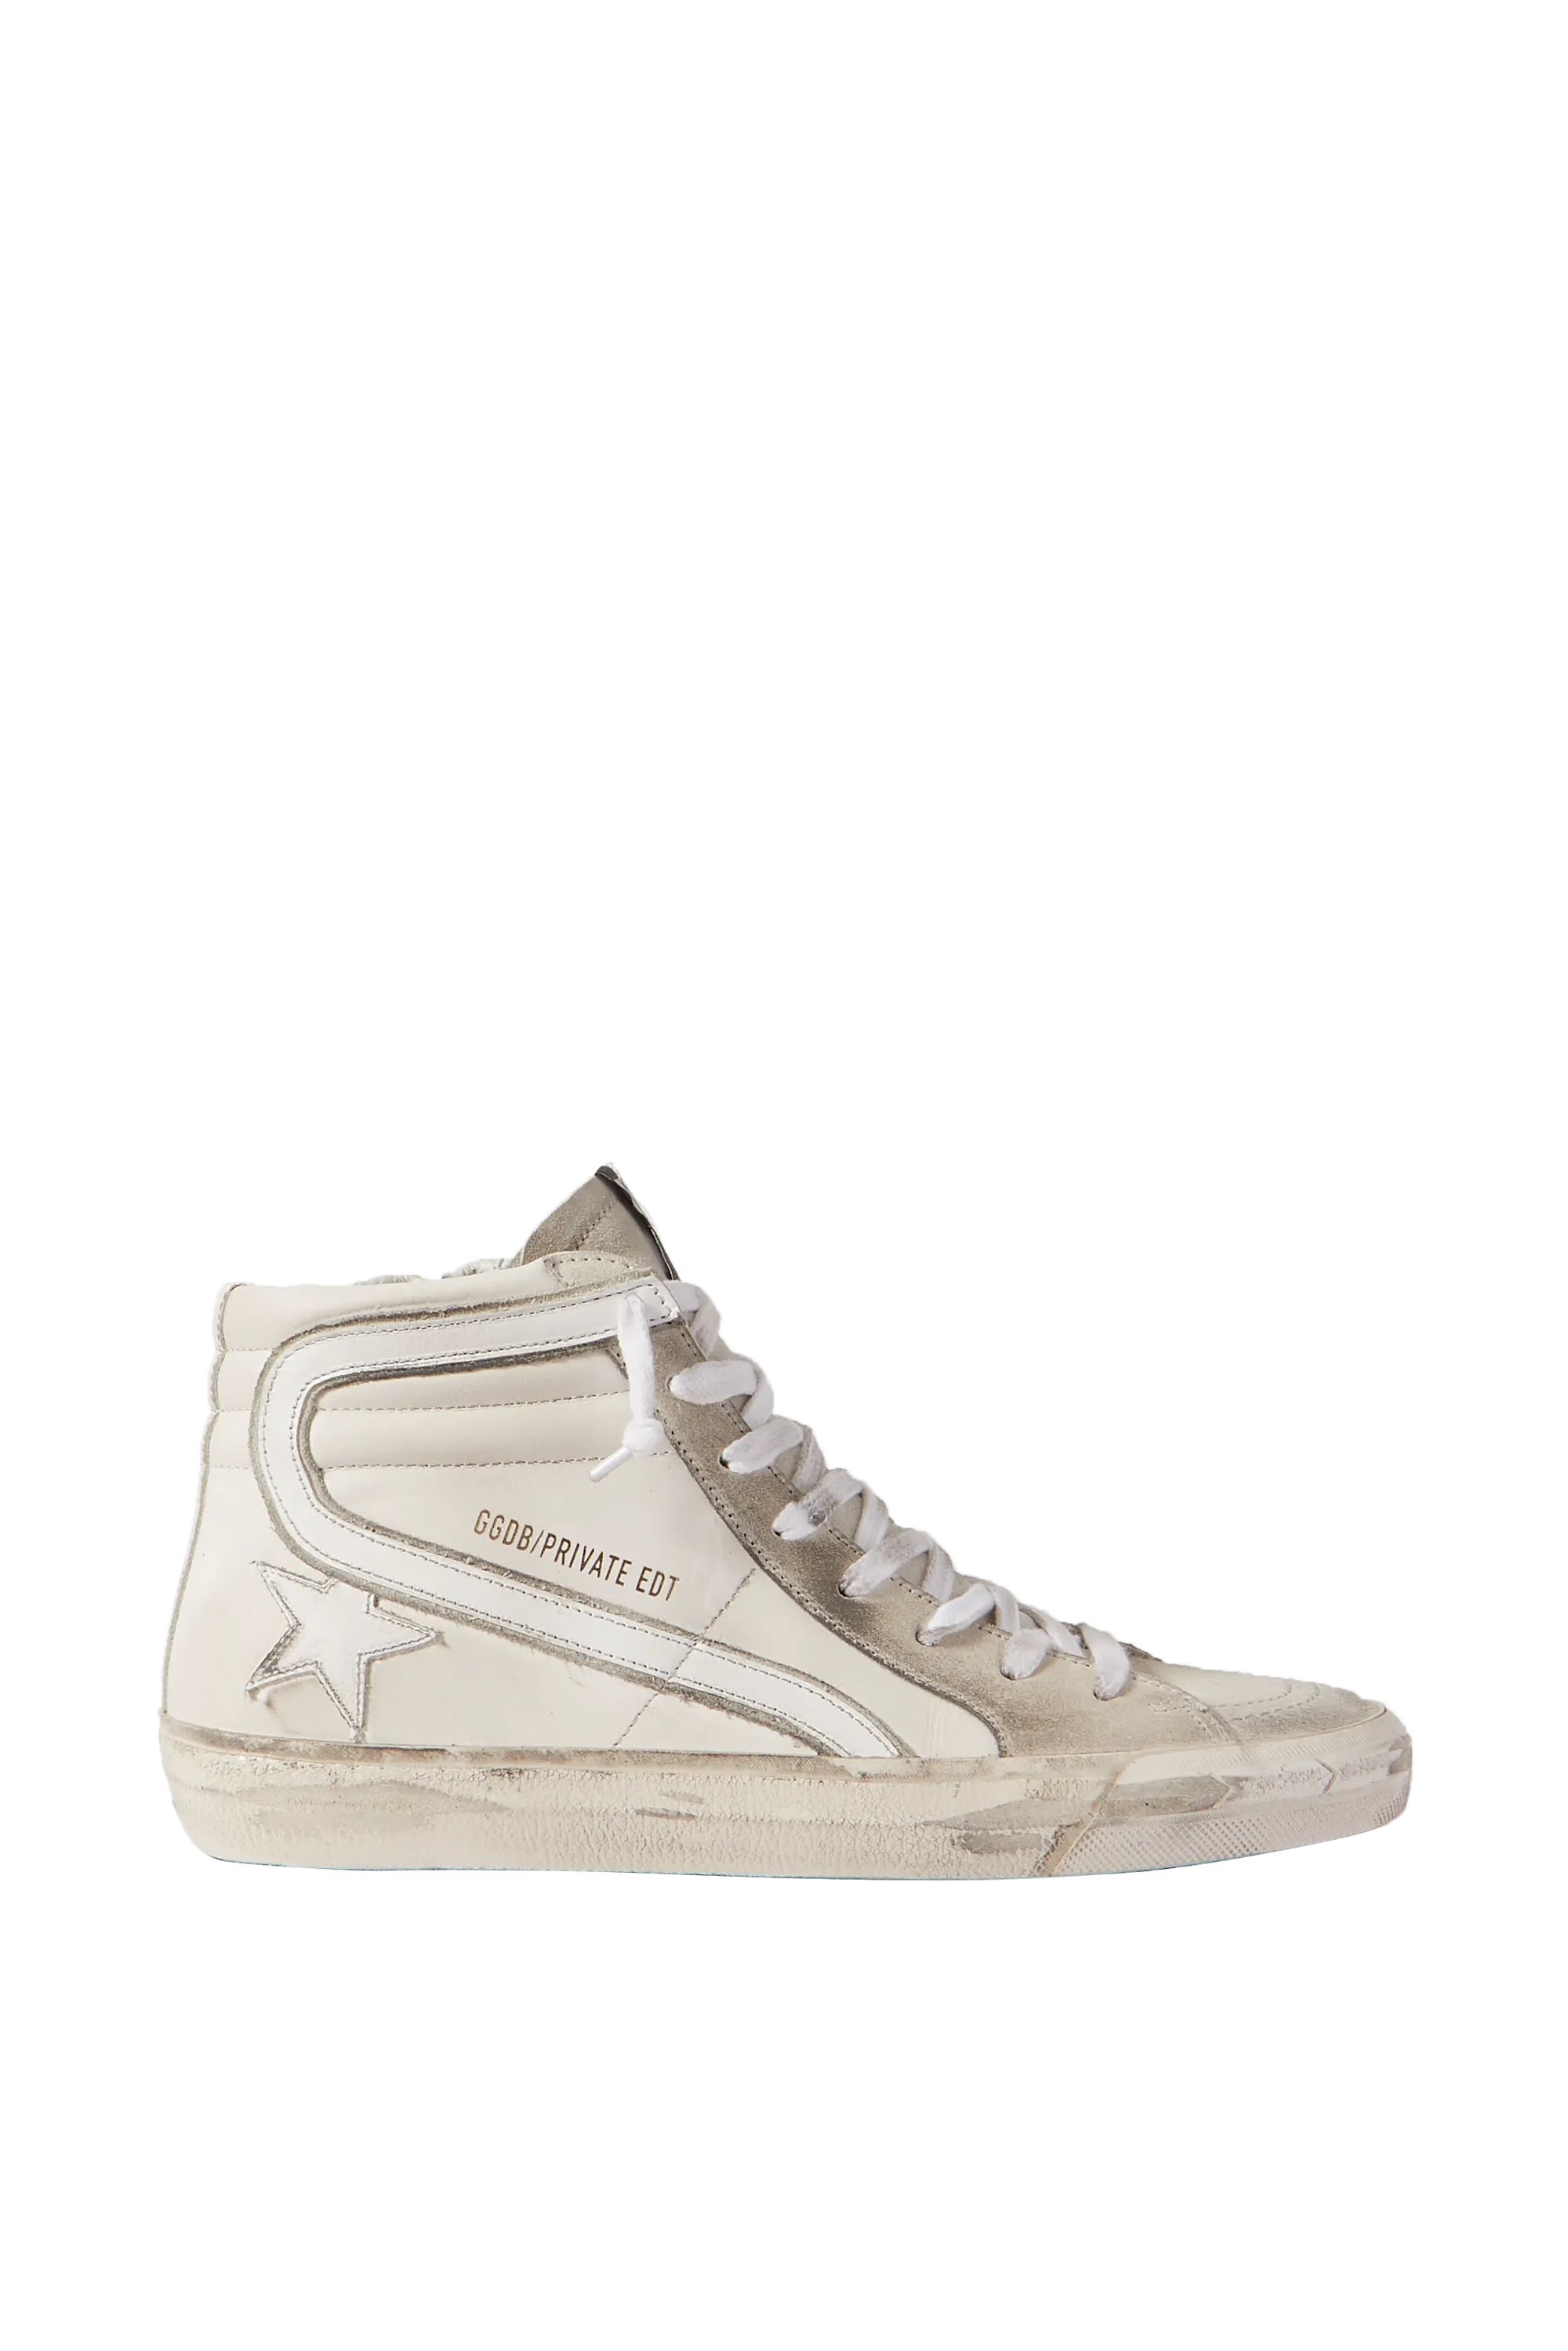 Cream Slide distressed leather and suede high-top sneakers | Golden Goose | NET-A-PORTER | NET-A-PORTER (US)